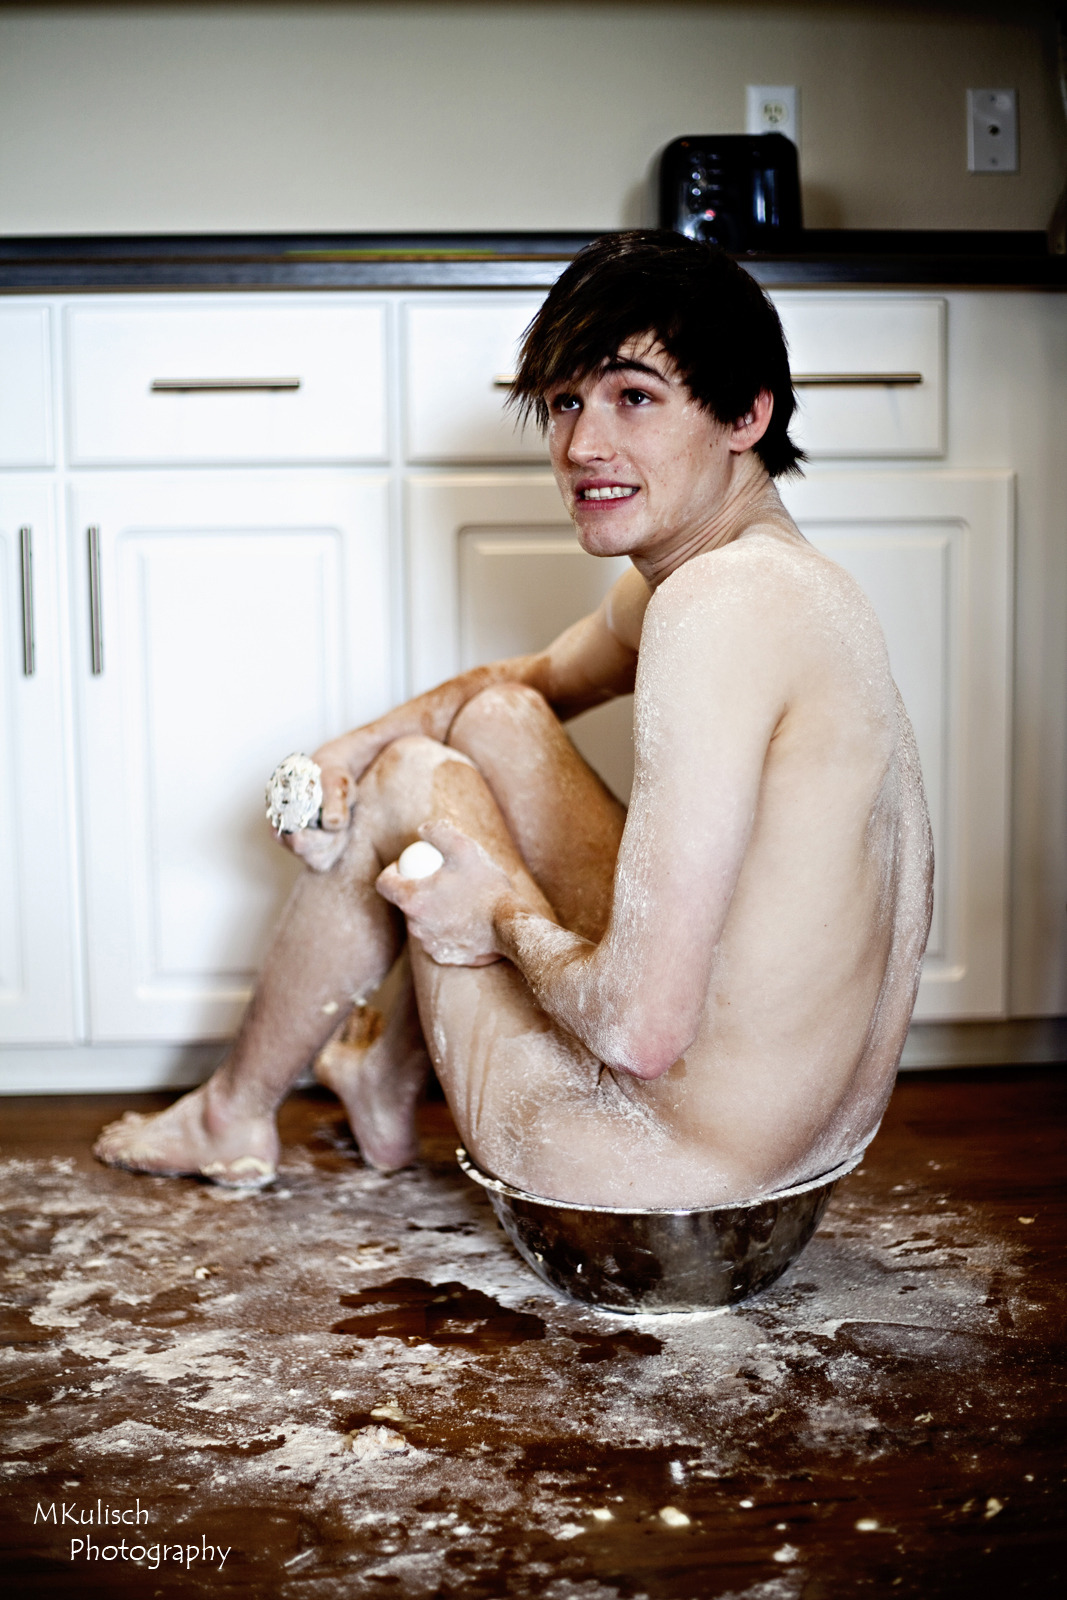 My first shoot with Dylan, back in 2012. A very messy day. 